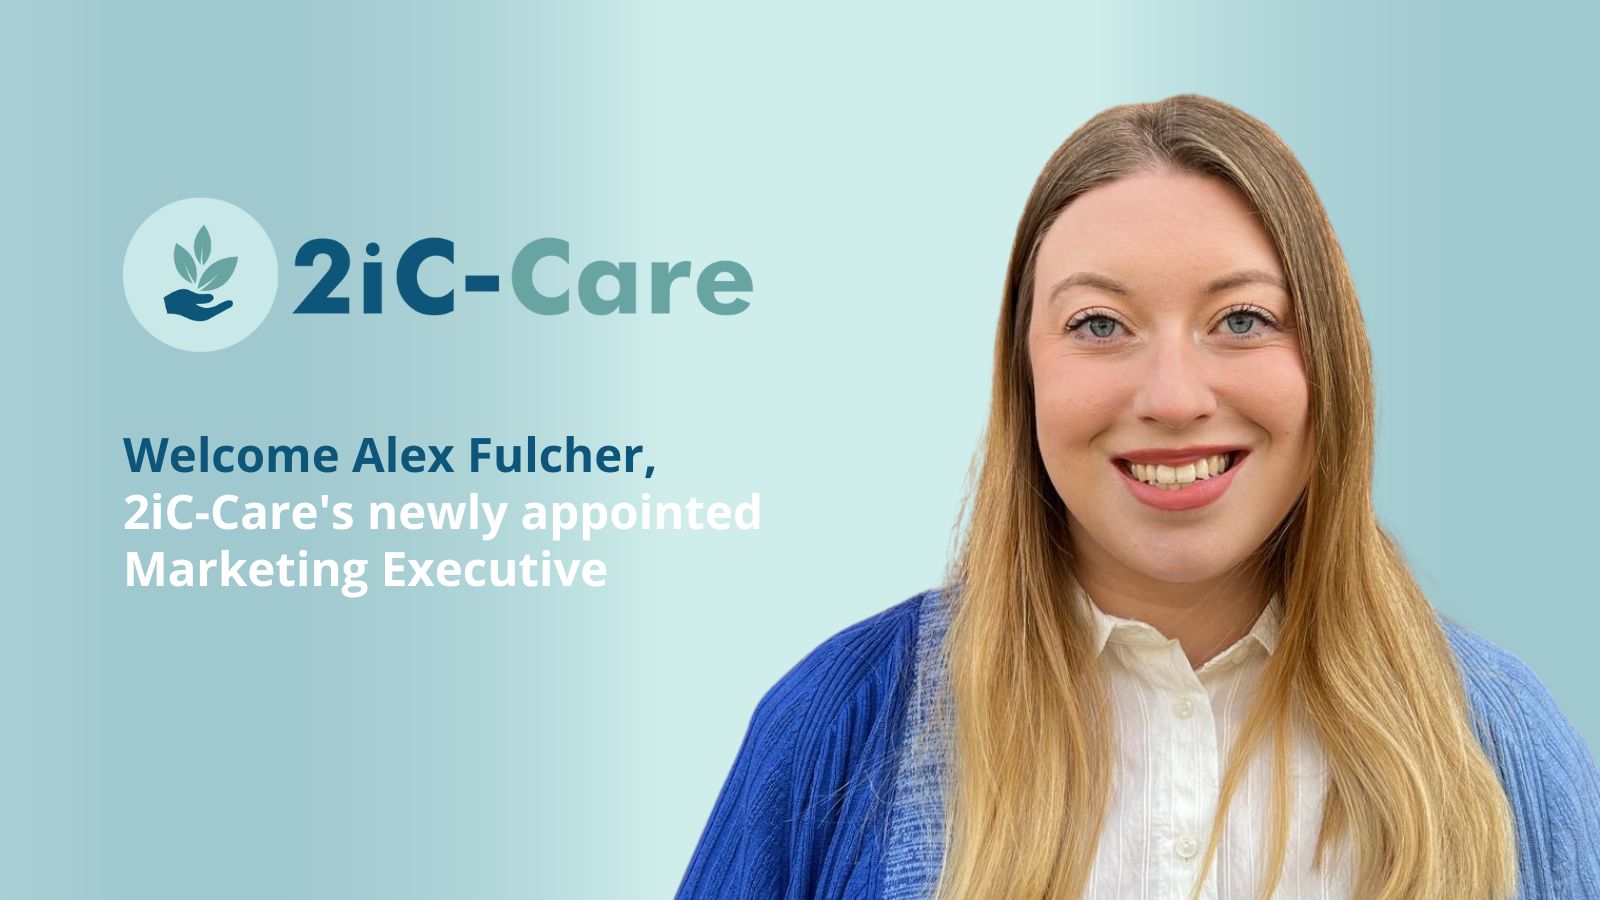 A Marketer with Heart Leads 2iC-Care’s Mission to Innovate Care